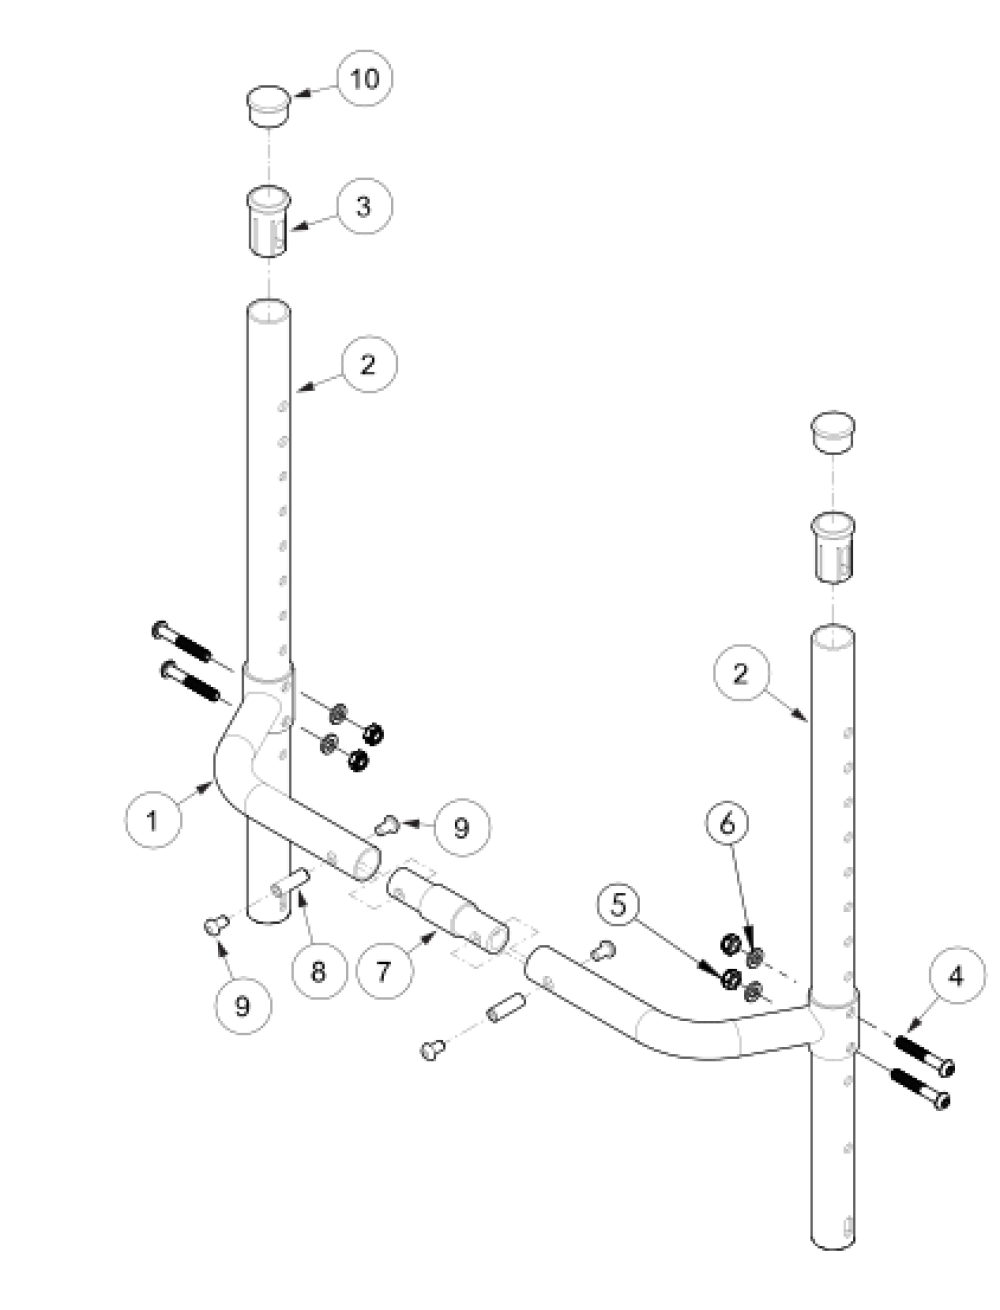 (discontinued) Rogue With Xp Option Fixed Height Backrest With Adjustable Height Rigidizer Bar parts diagram